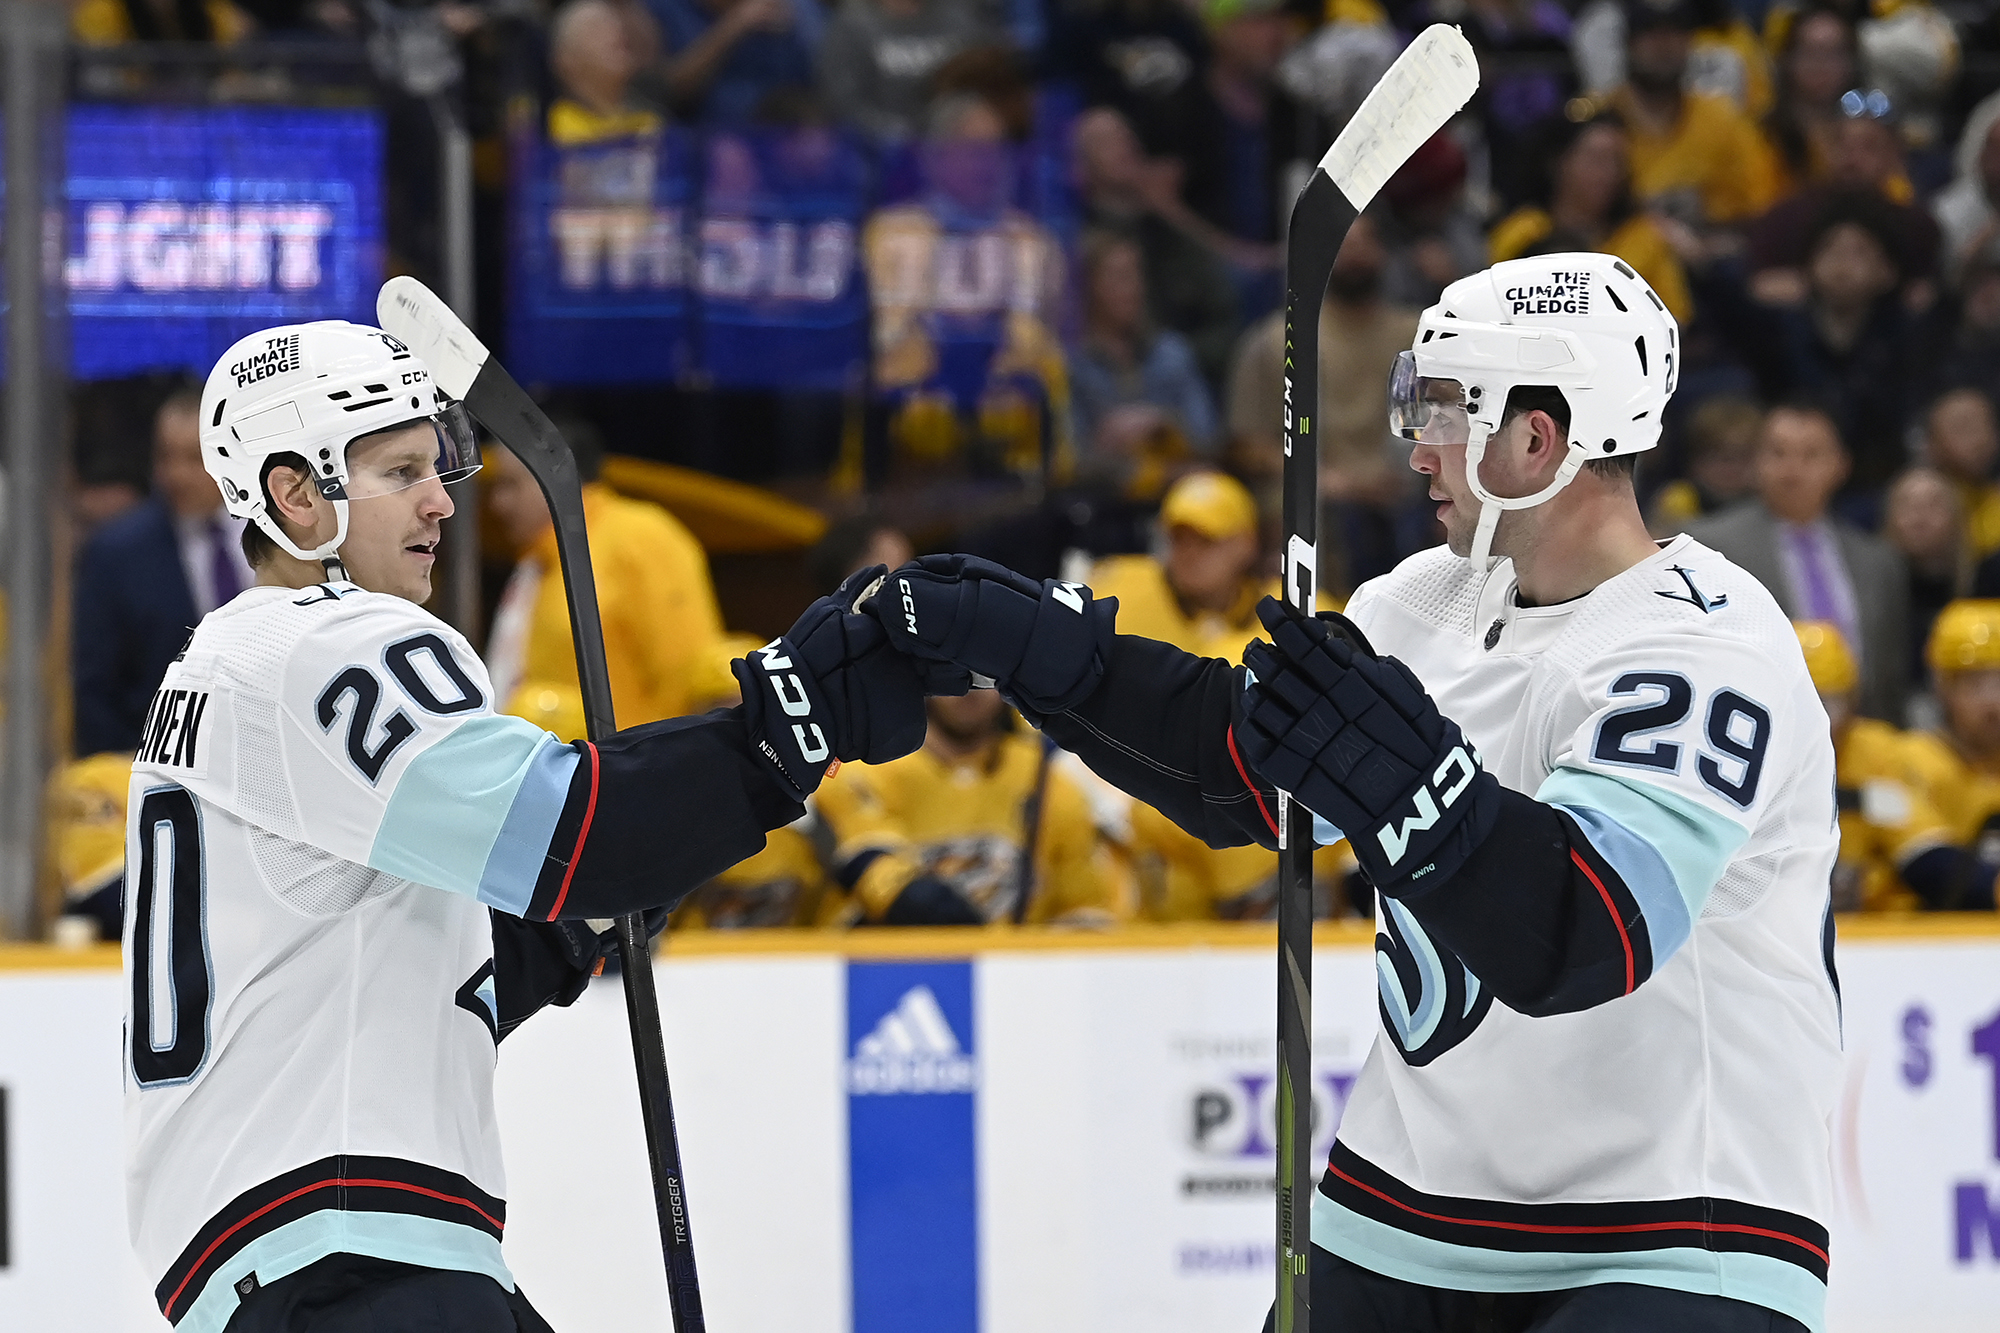 Seattle Kraken right wing Eeli Tolvanen (20) celebrates with defenseman Vince Dunn (29) after scoring a goal against the Nashville Predators during the first period of an NHL hockey game Saturday, March 25, 2023, in Nashville, Tenn.